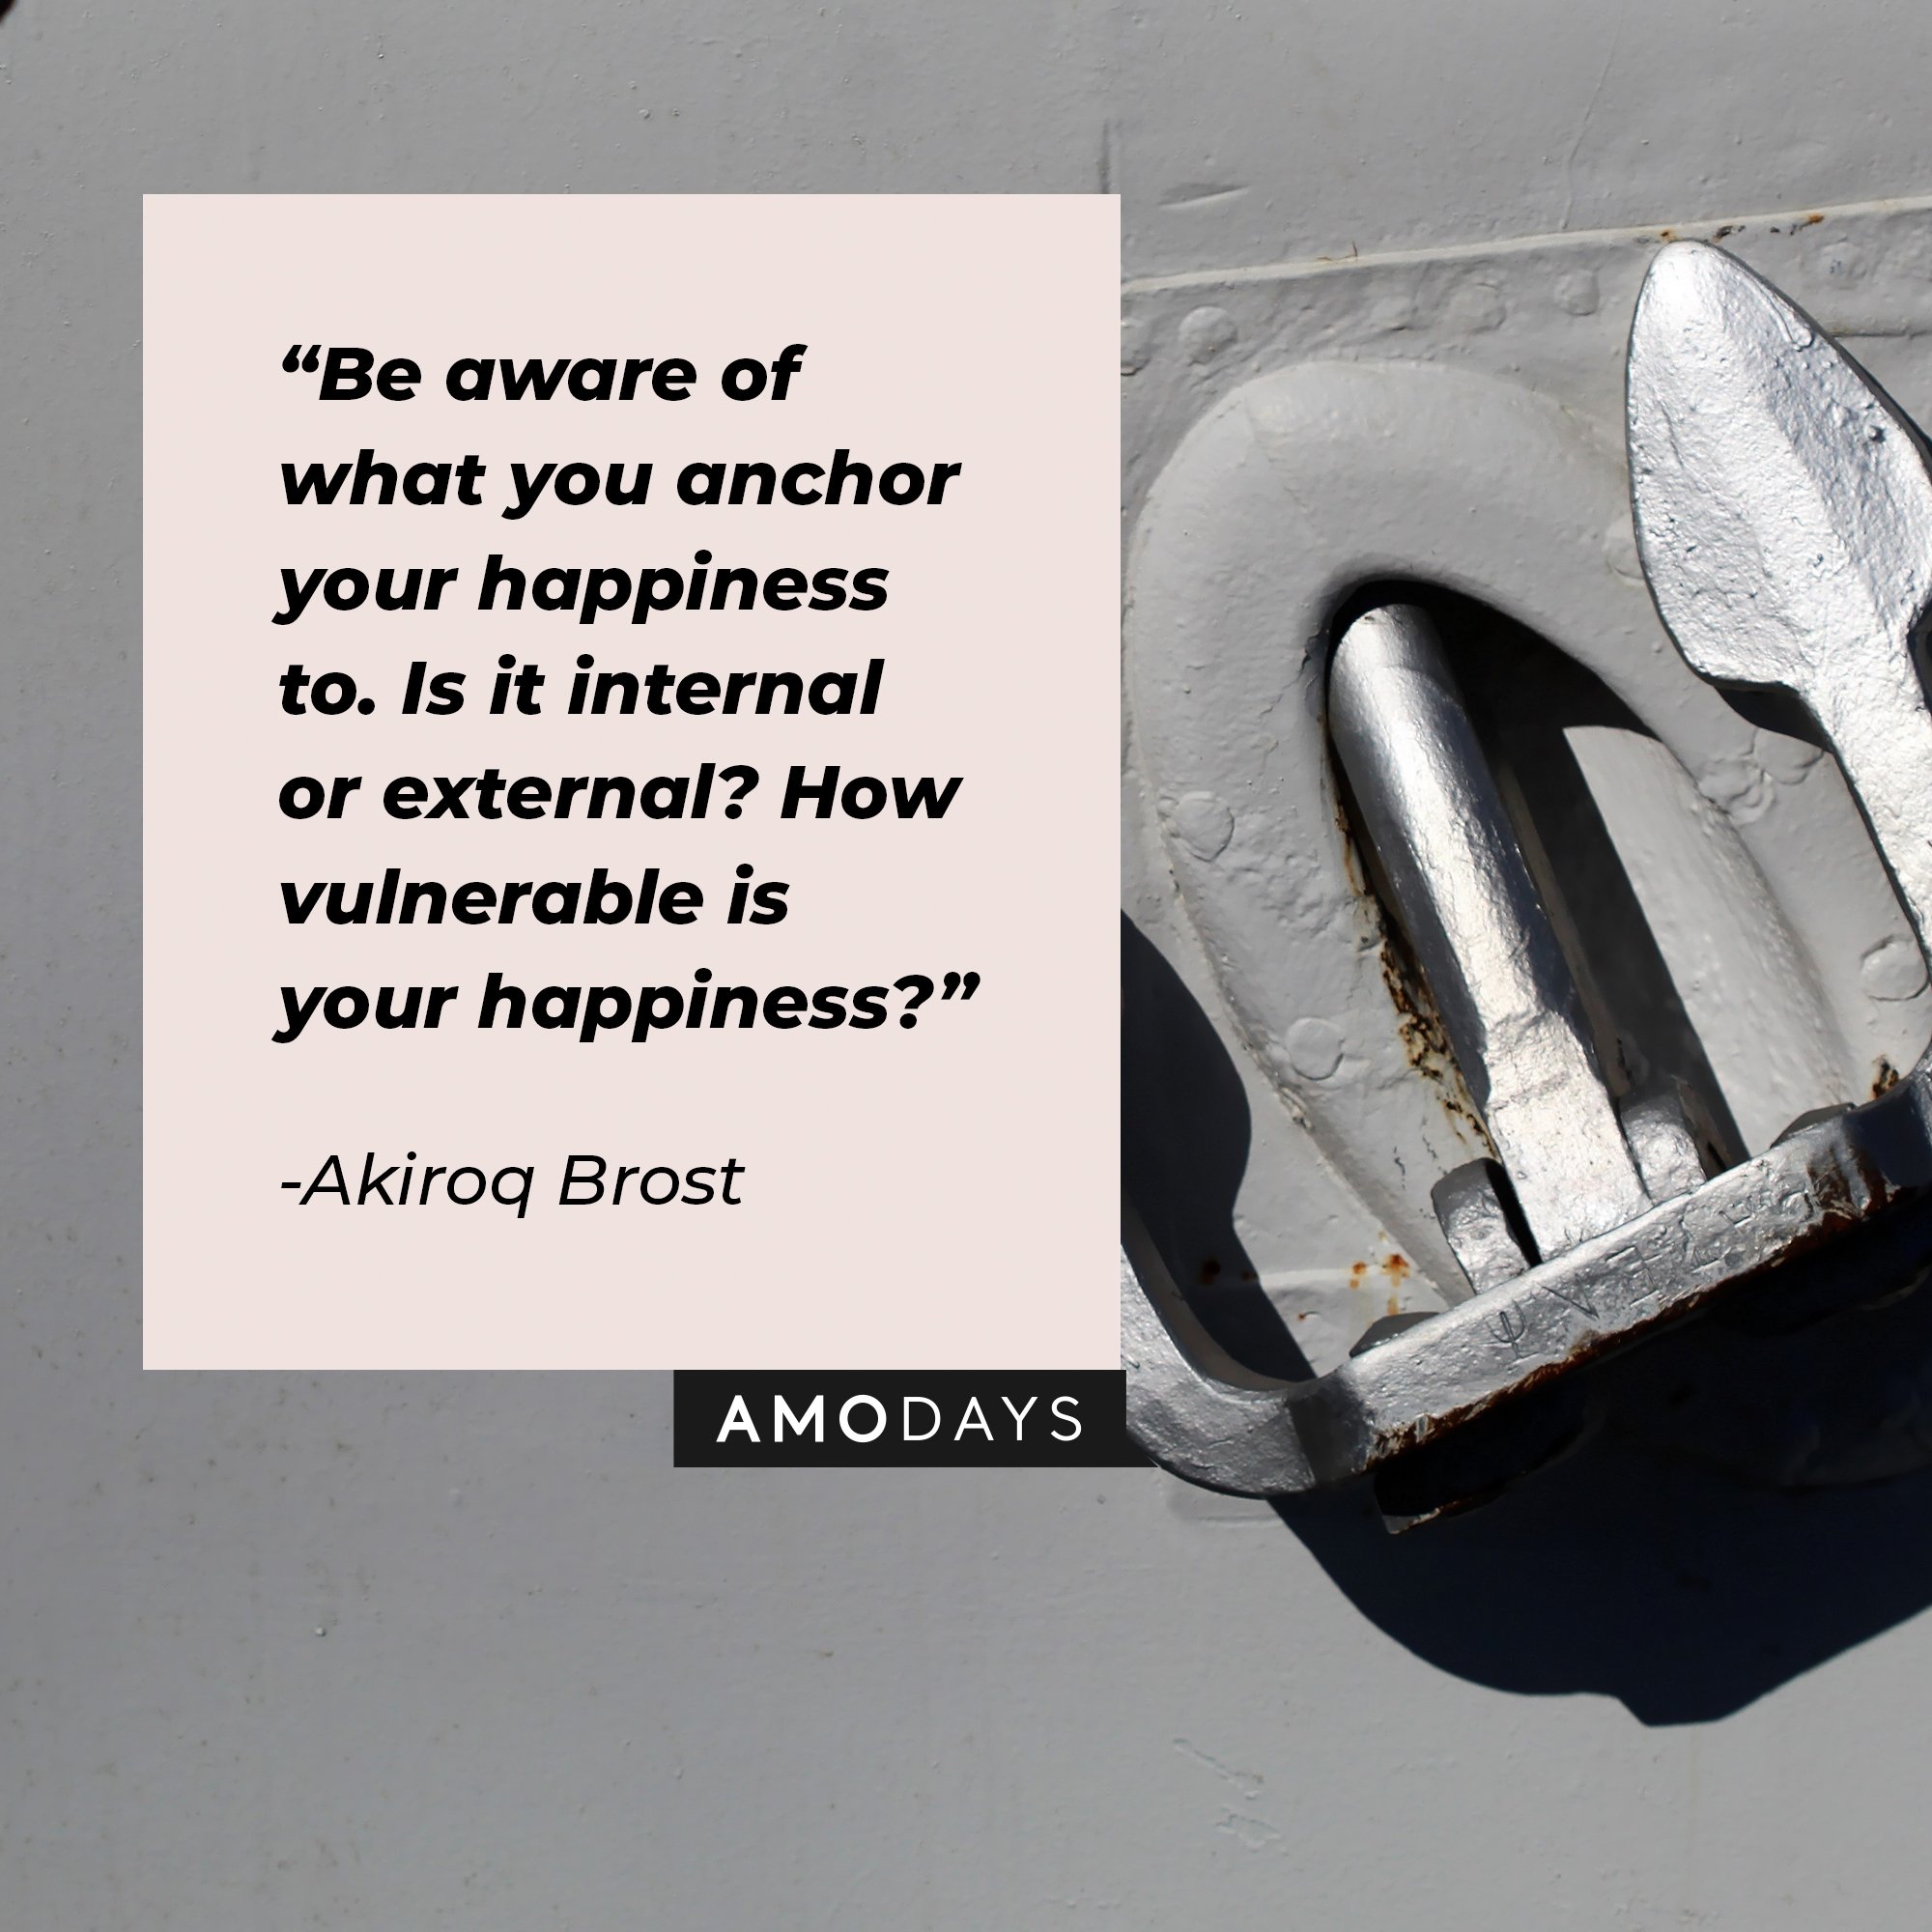 Akiroq Brost's quote: "Be aware of what you anchor your happiness to. Is it internal or external? How vulnerable is your happiness?" | Image: AmoDays